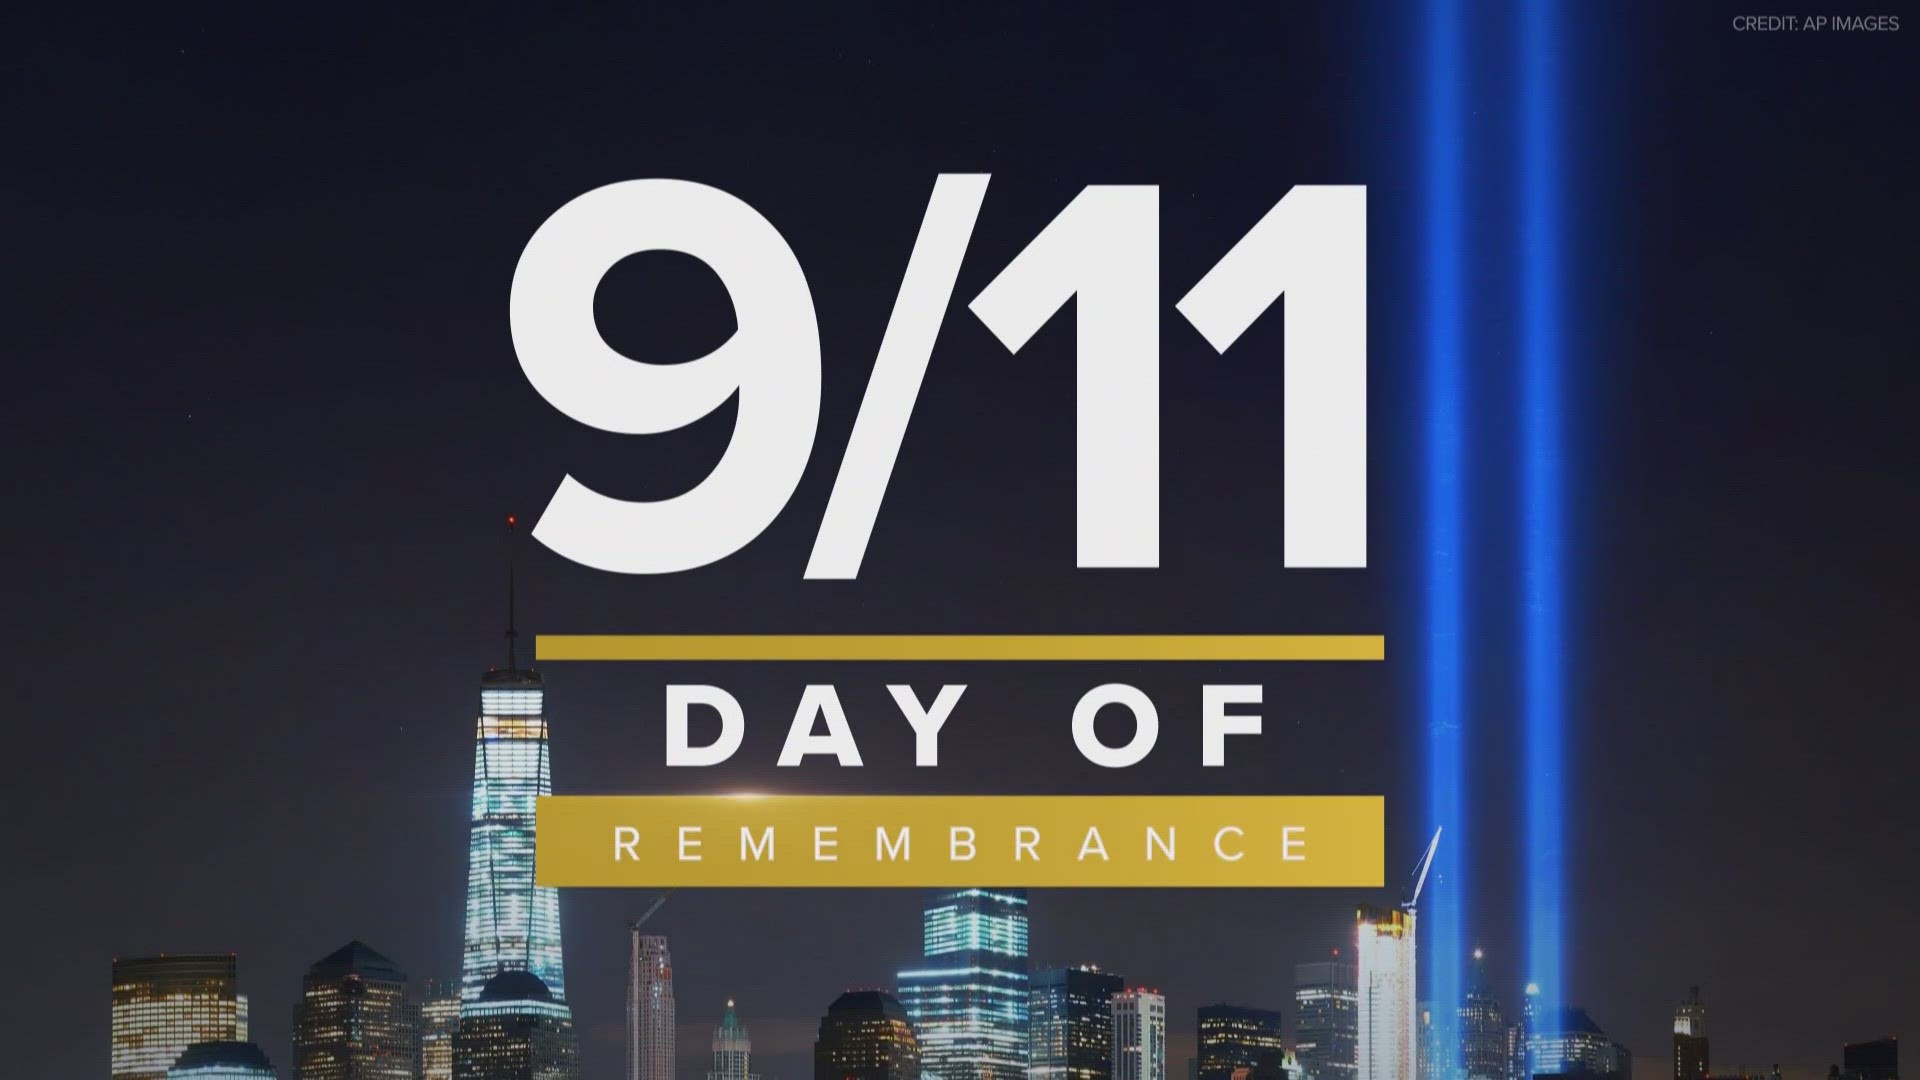 Blanca Cobb explains why remembering the tragedy of September 11th and how it still impacts people.